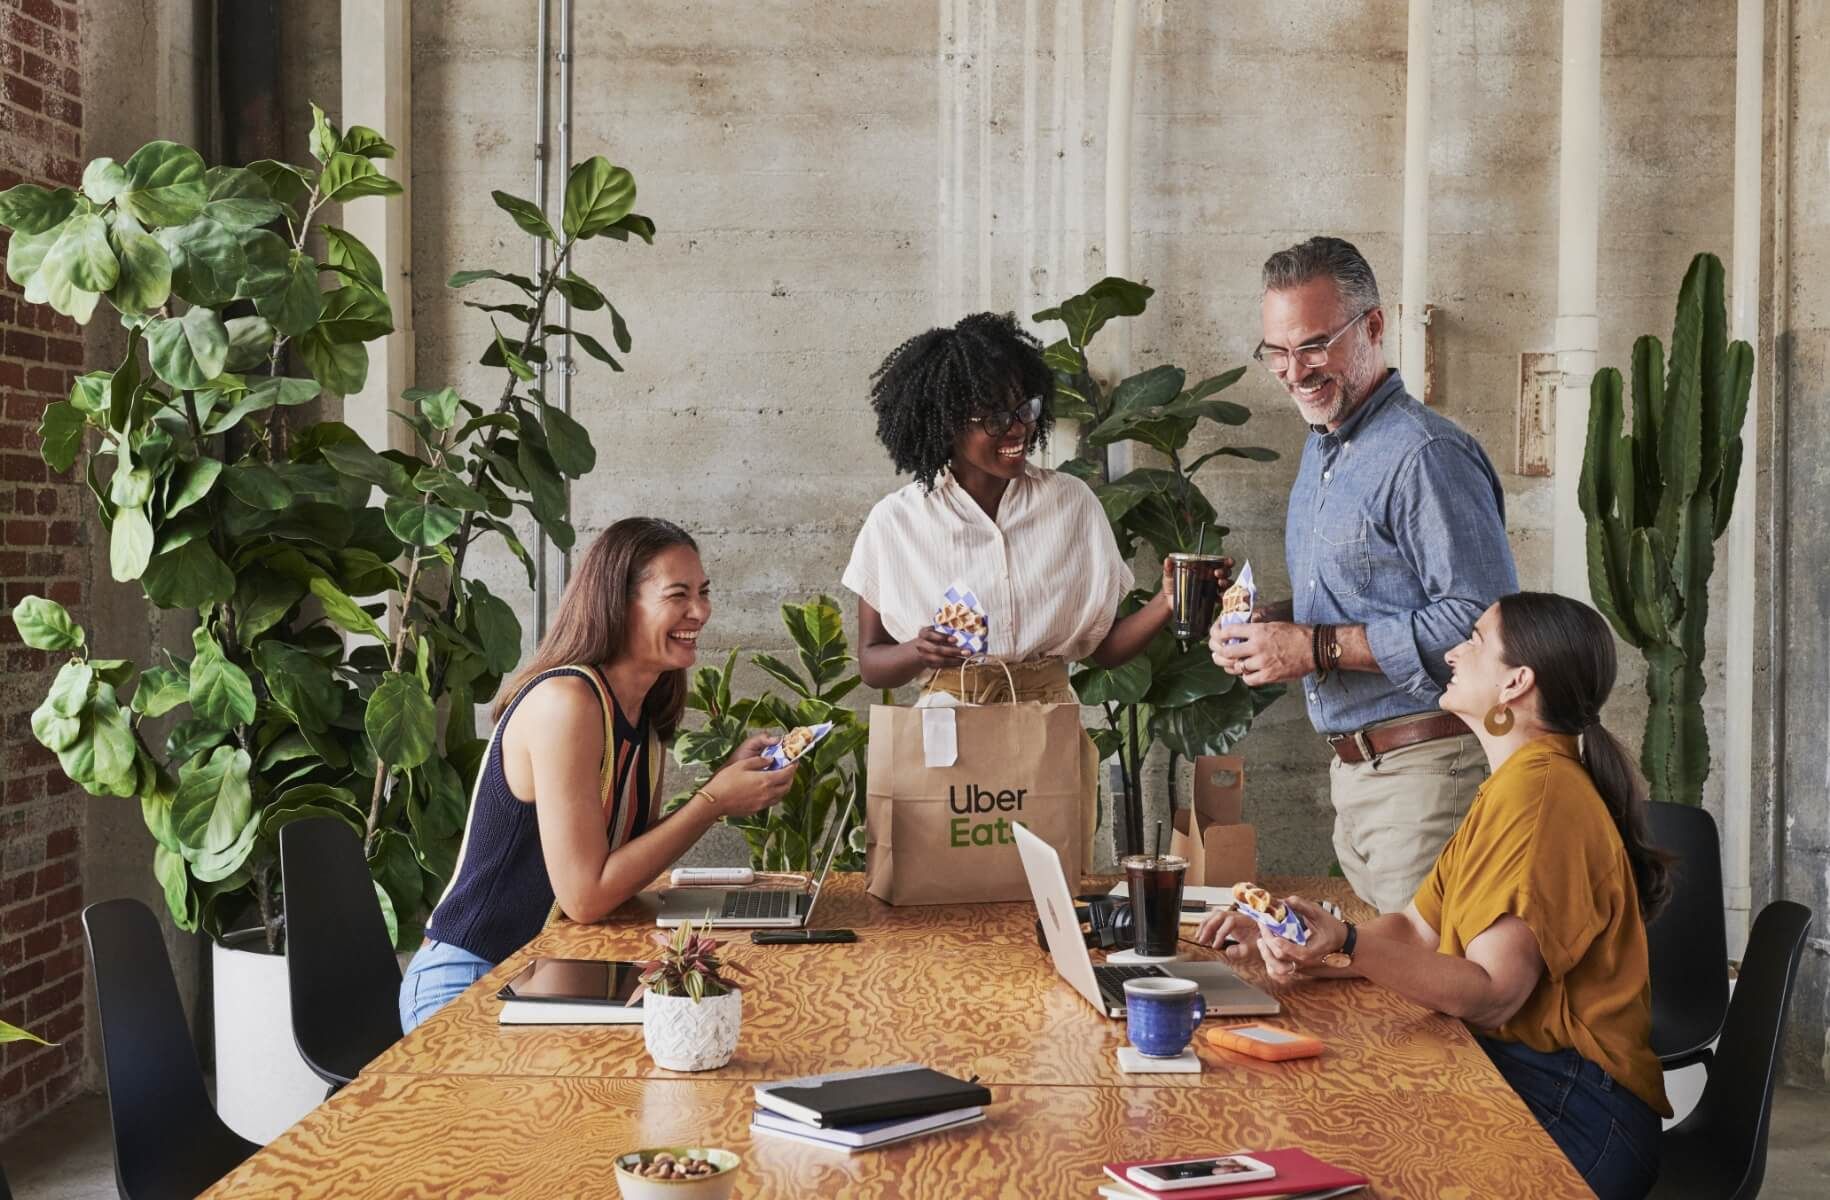 office meeting with laptops and note books on table along with take out waffles from Uber eats. Four people sitting and standing around table are laughing and smiling